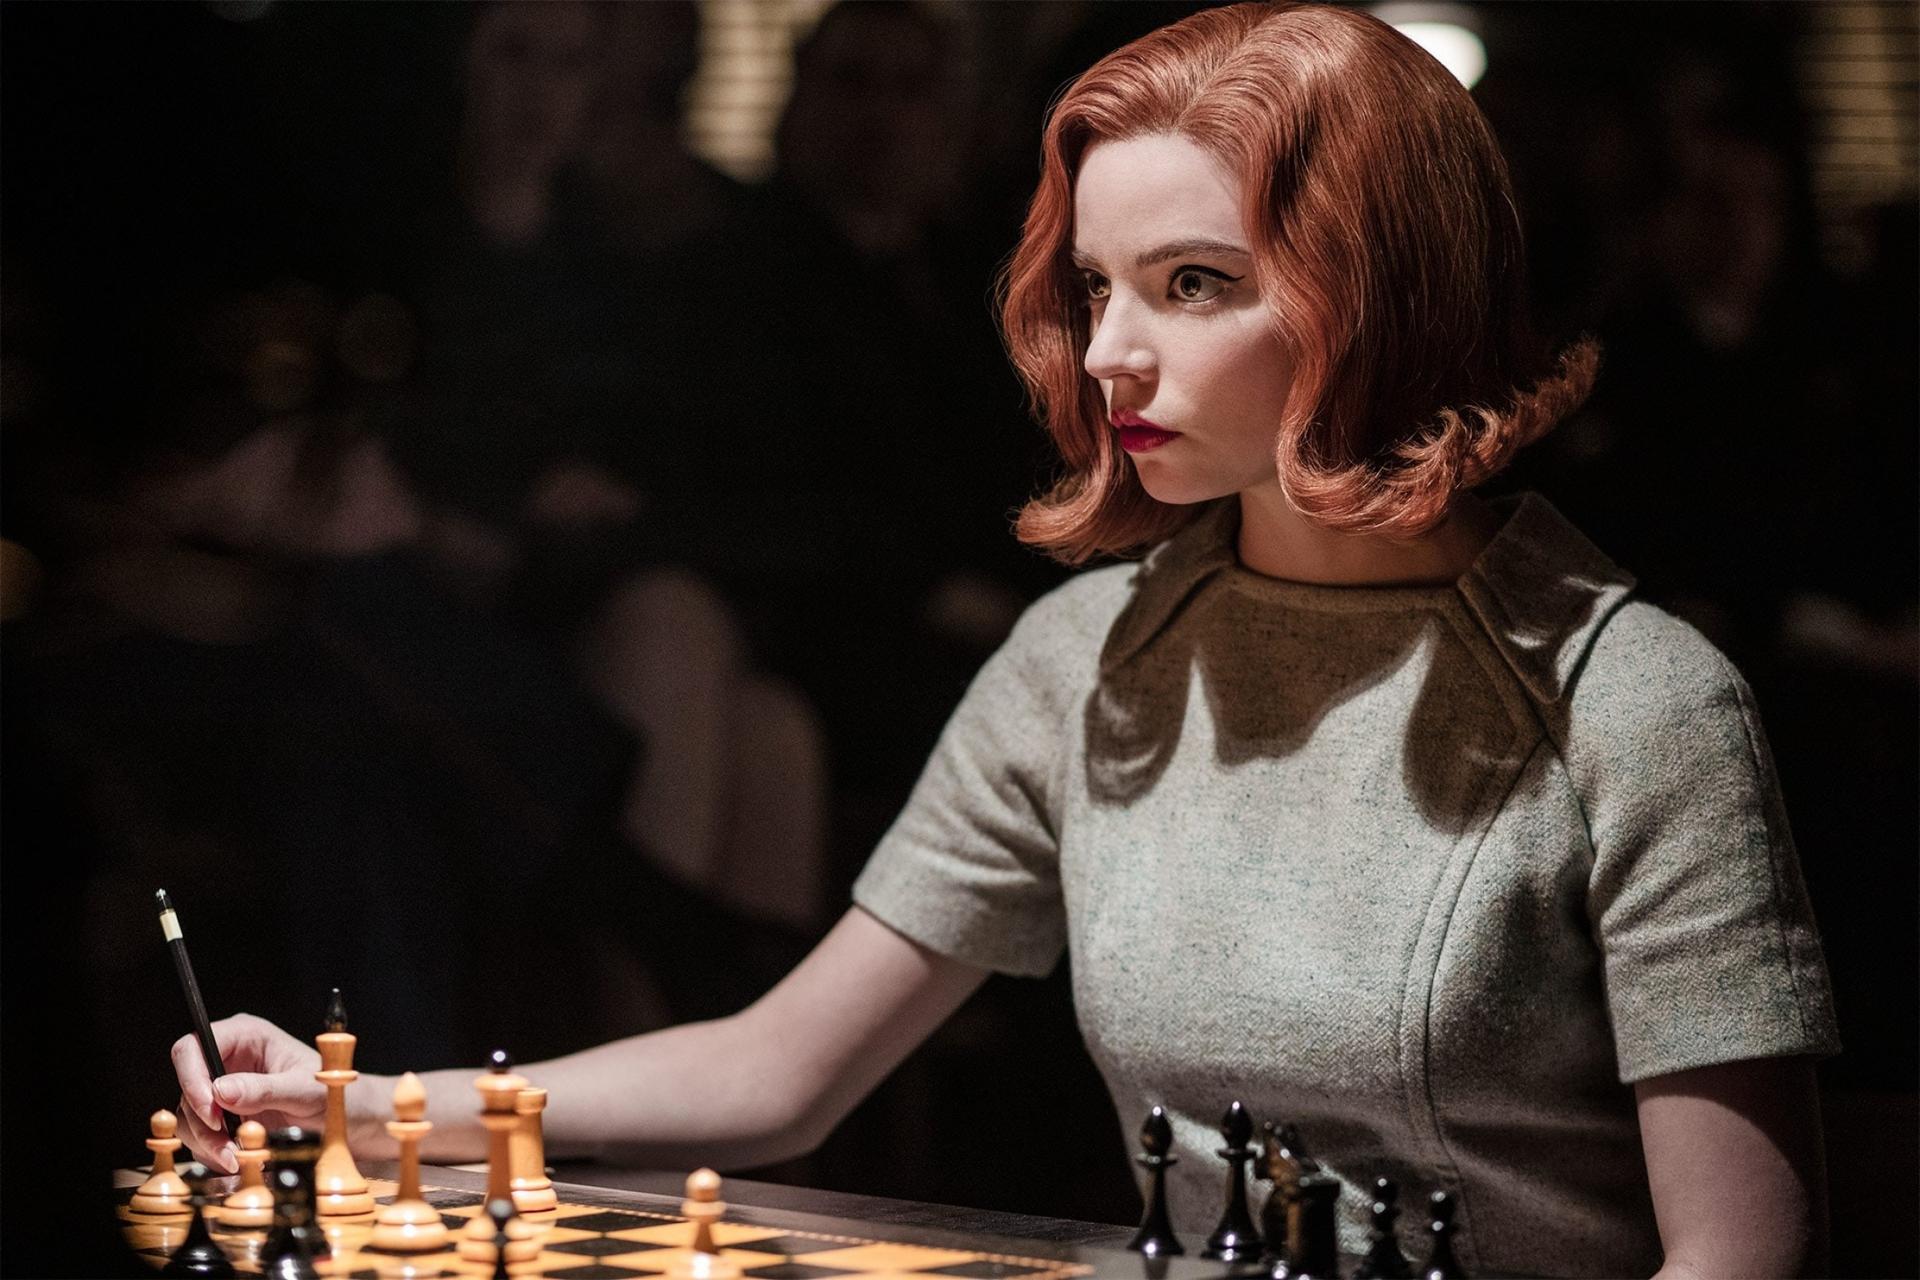 The show has inspired a new generation of chess players worldwide, as people remain indoors and glued to their streaming devices during the pandemic. 